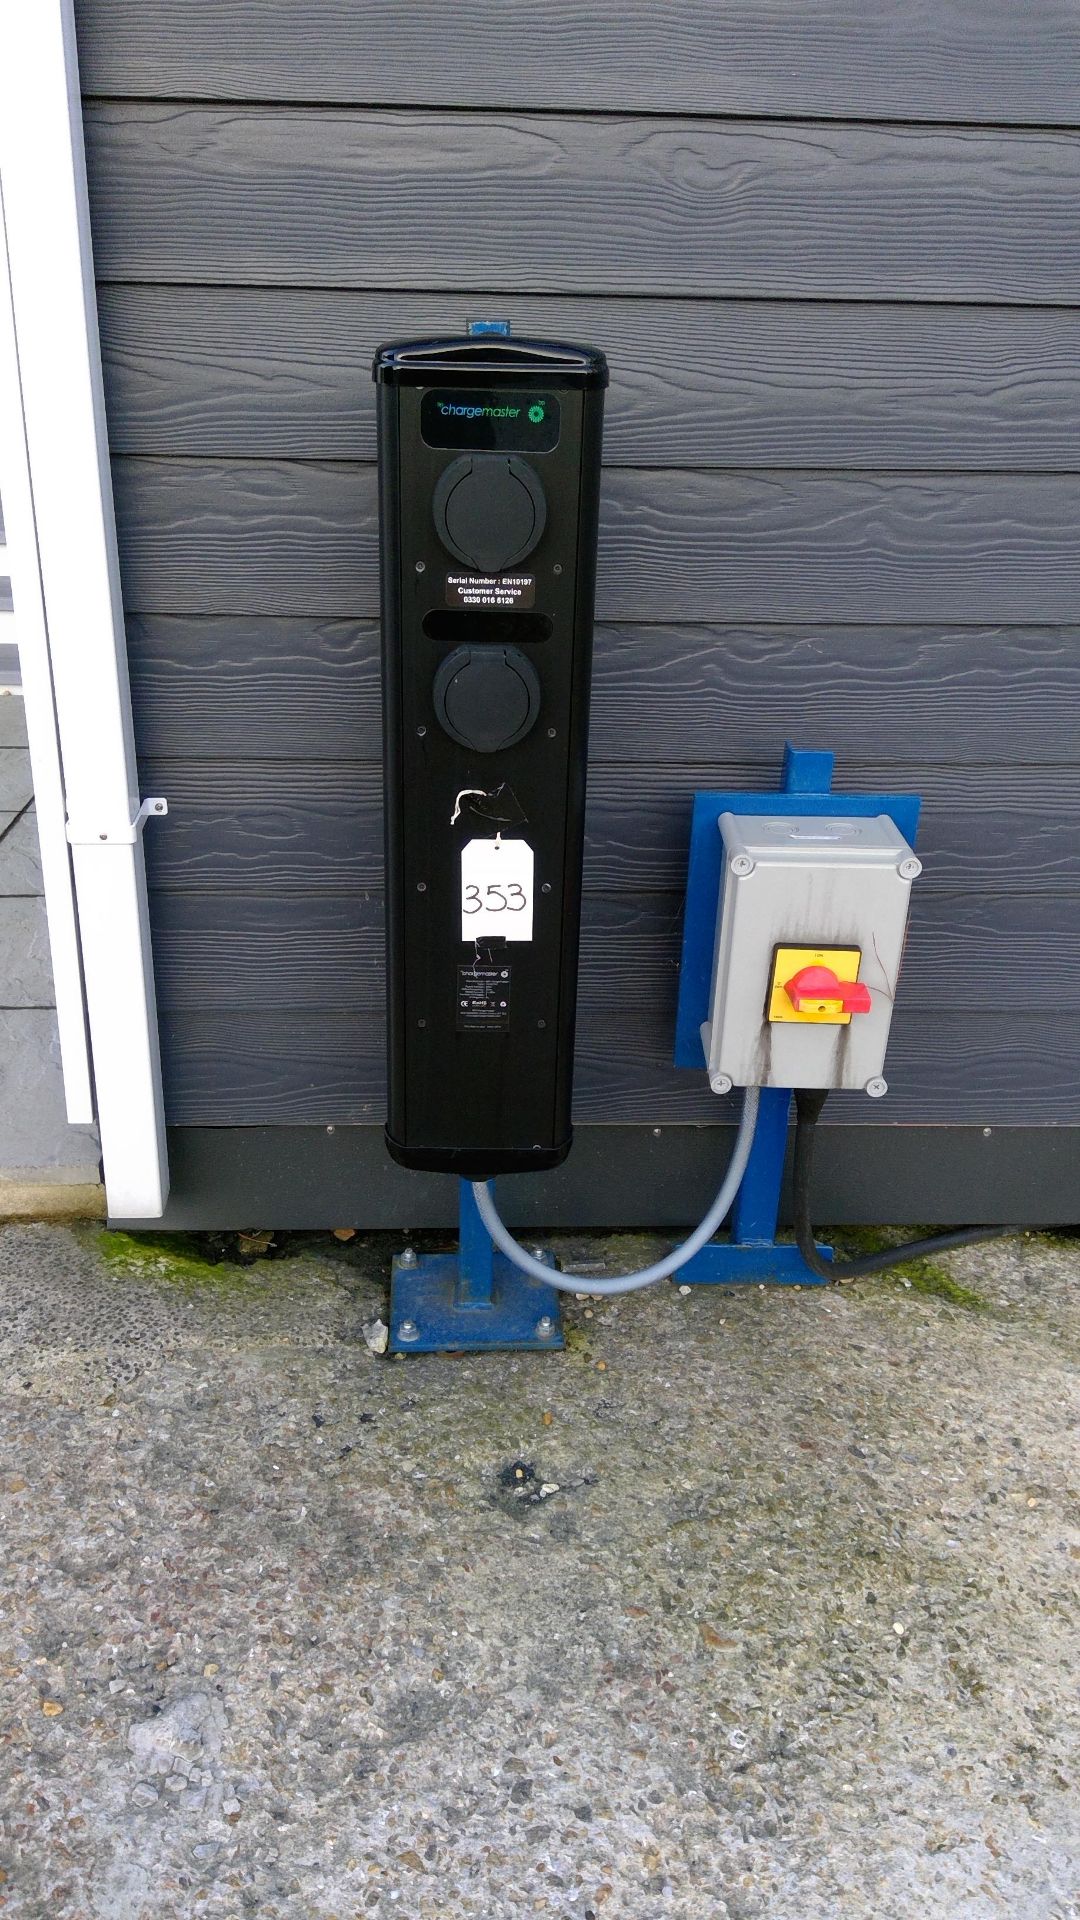 BP Chargemaster dual EV charging point with mounting post